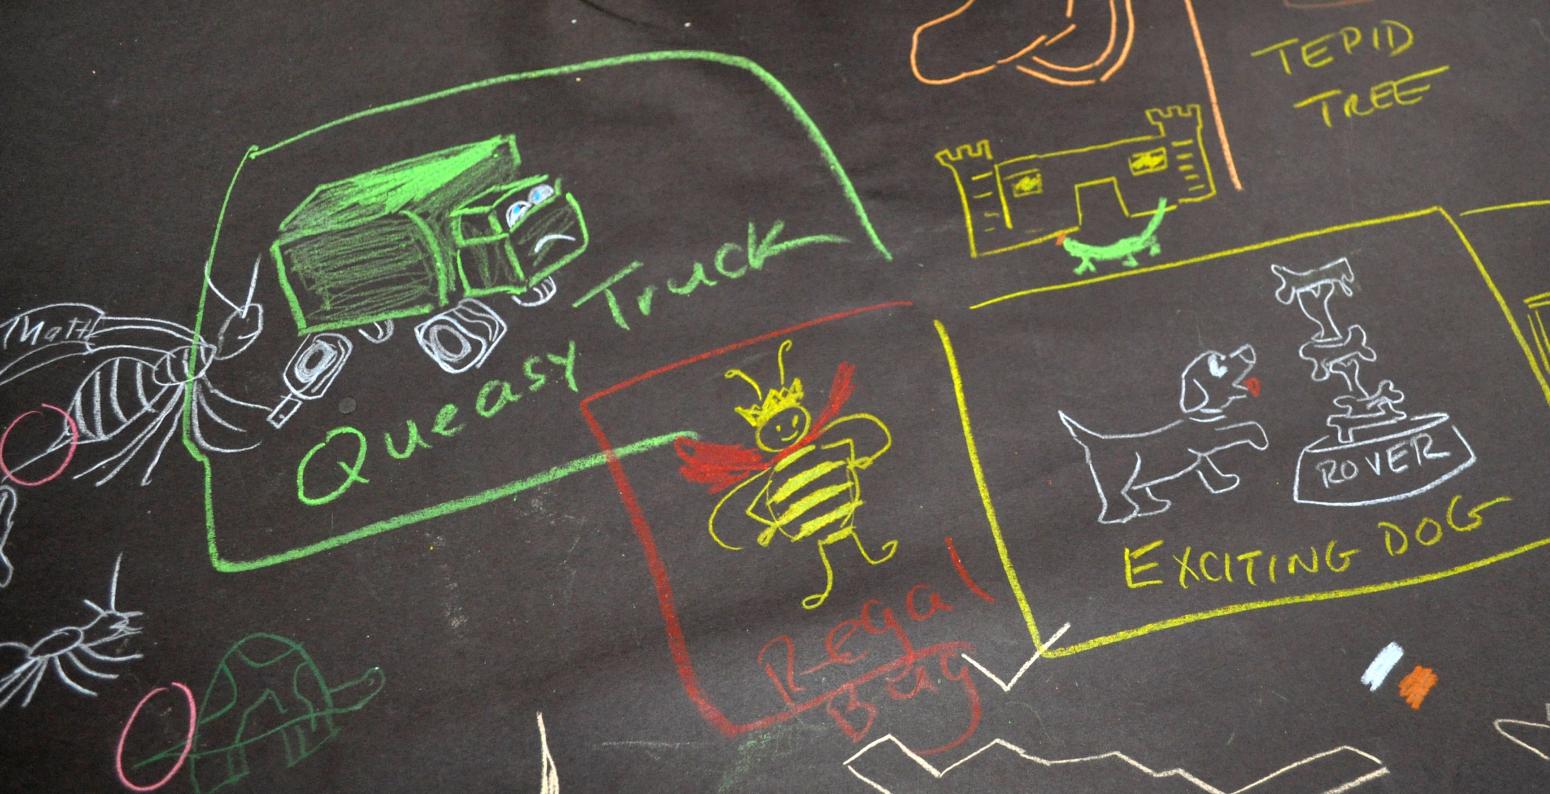 Drawings on black table covers including a queasy truck, tepid tree, elegant museum, and regal bug. 